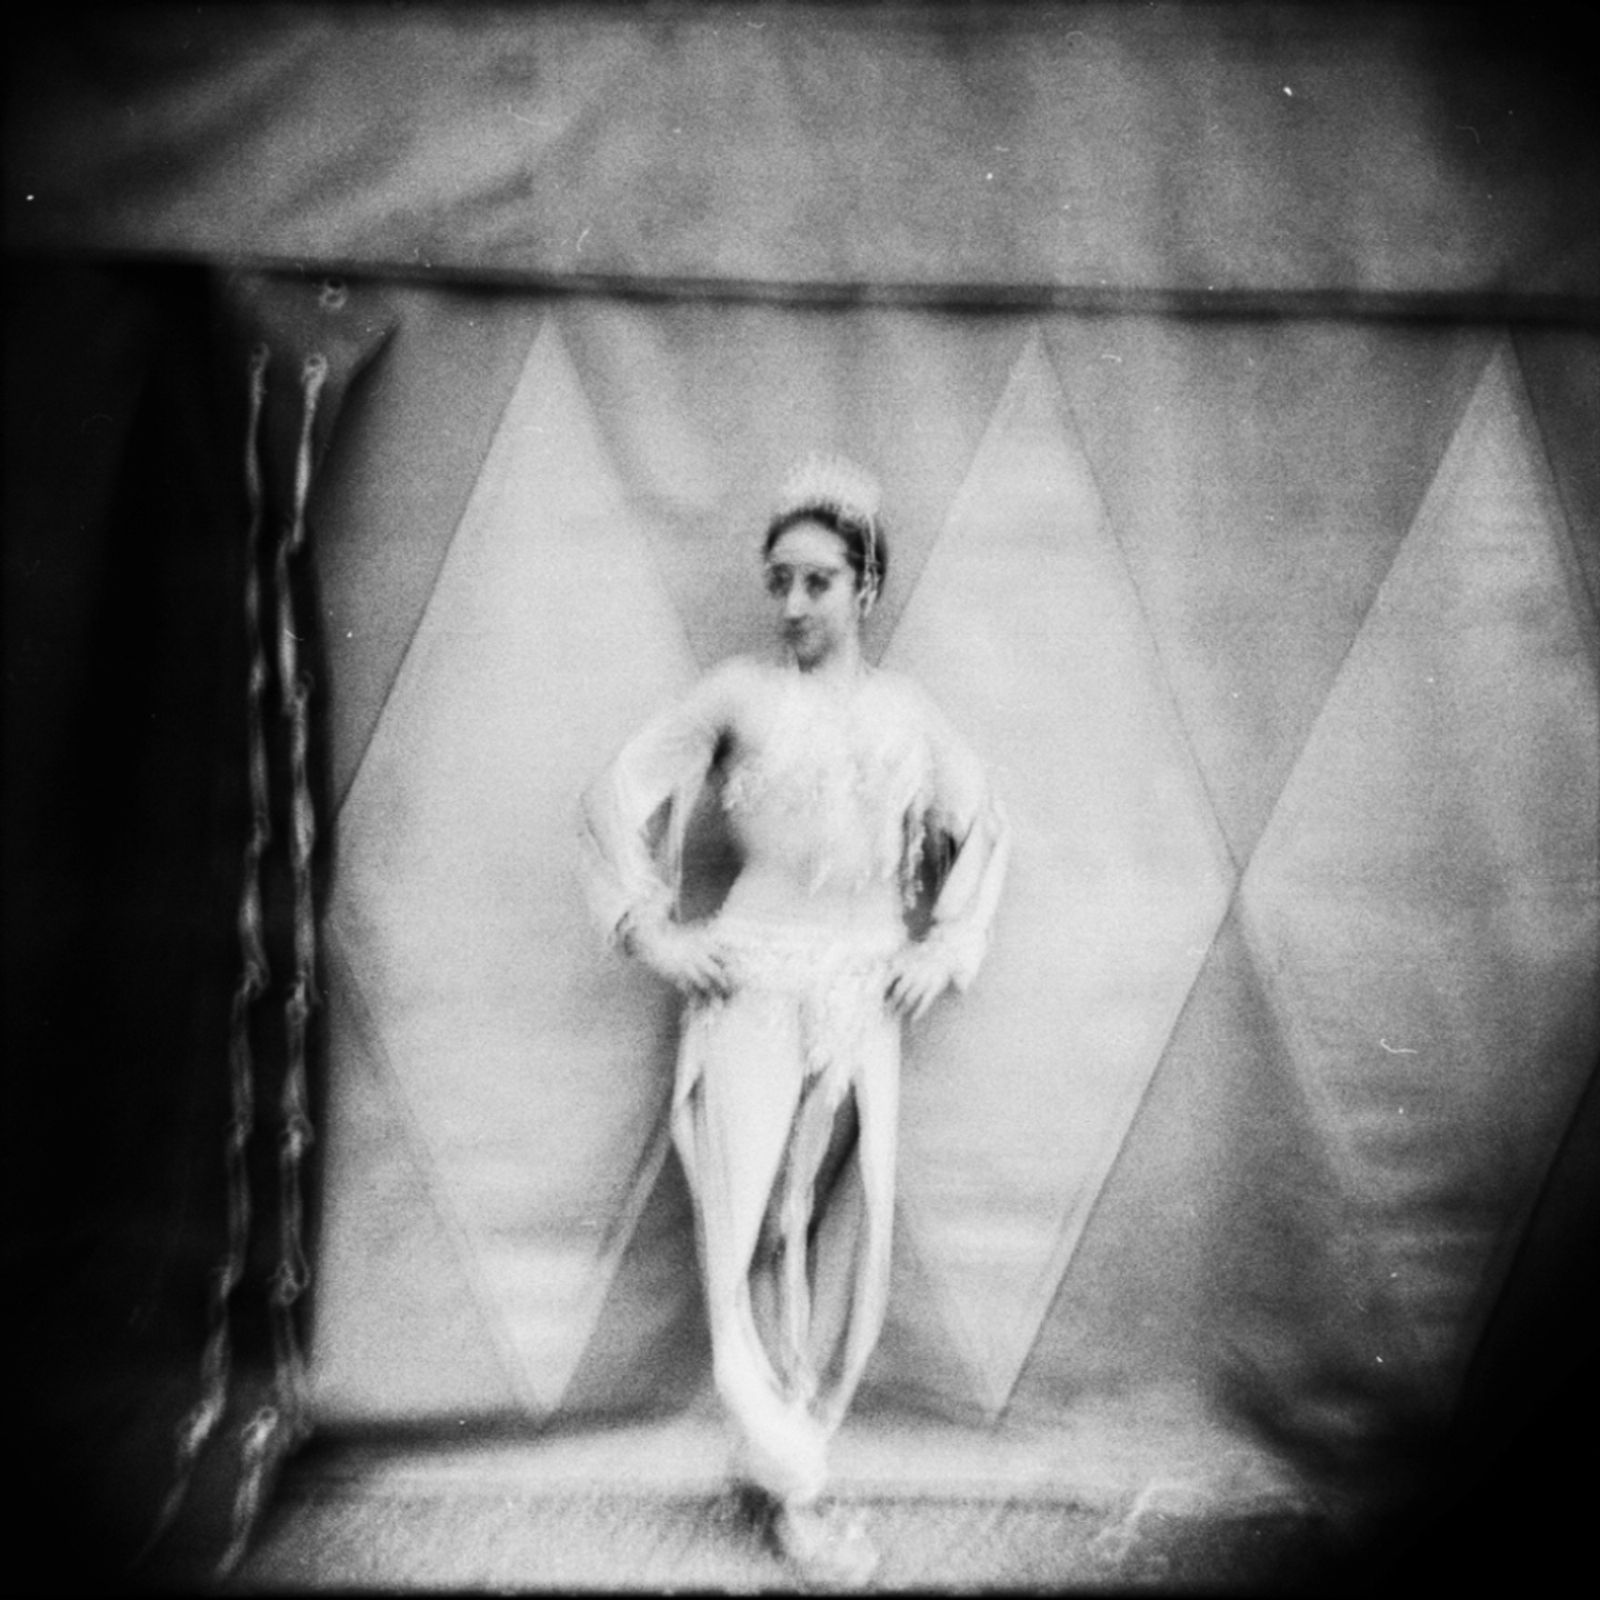 © Sabrina Caramanico - Image from the Circus photography project